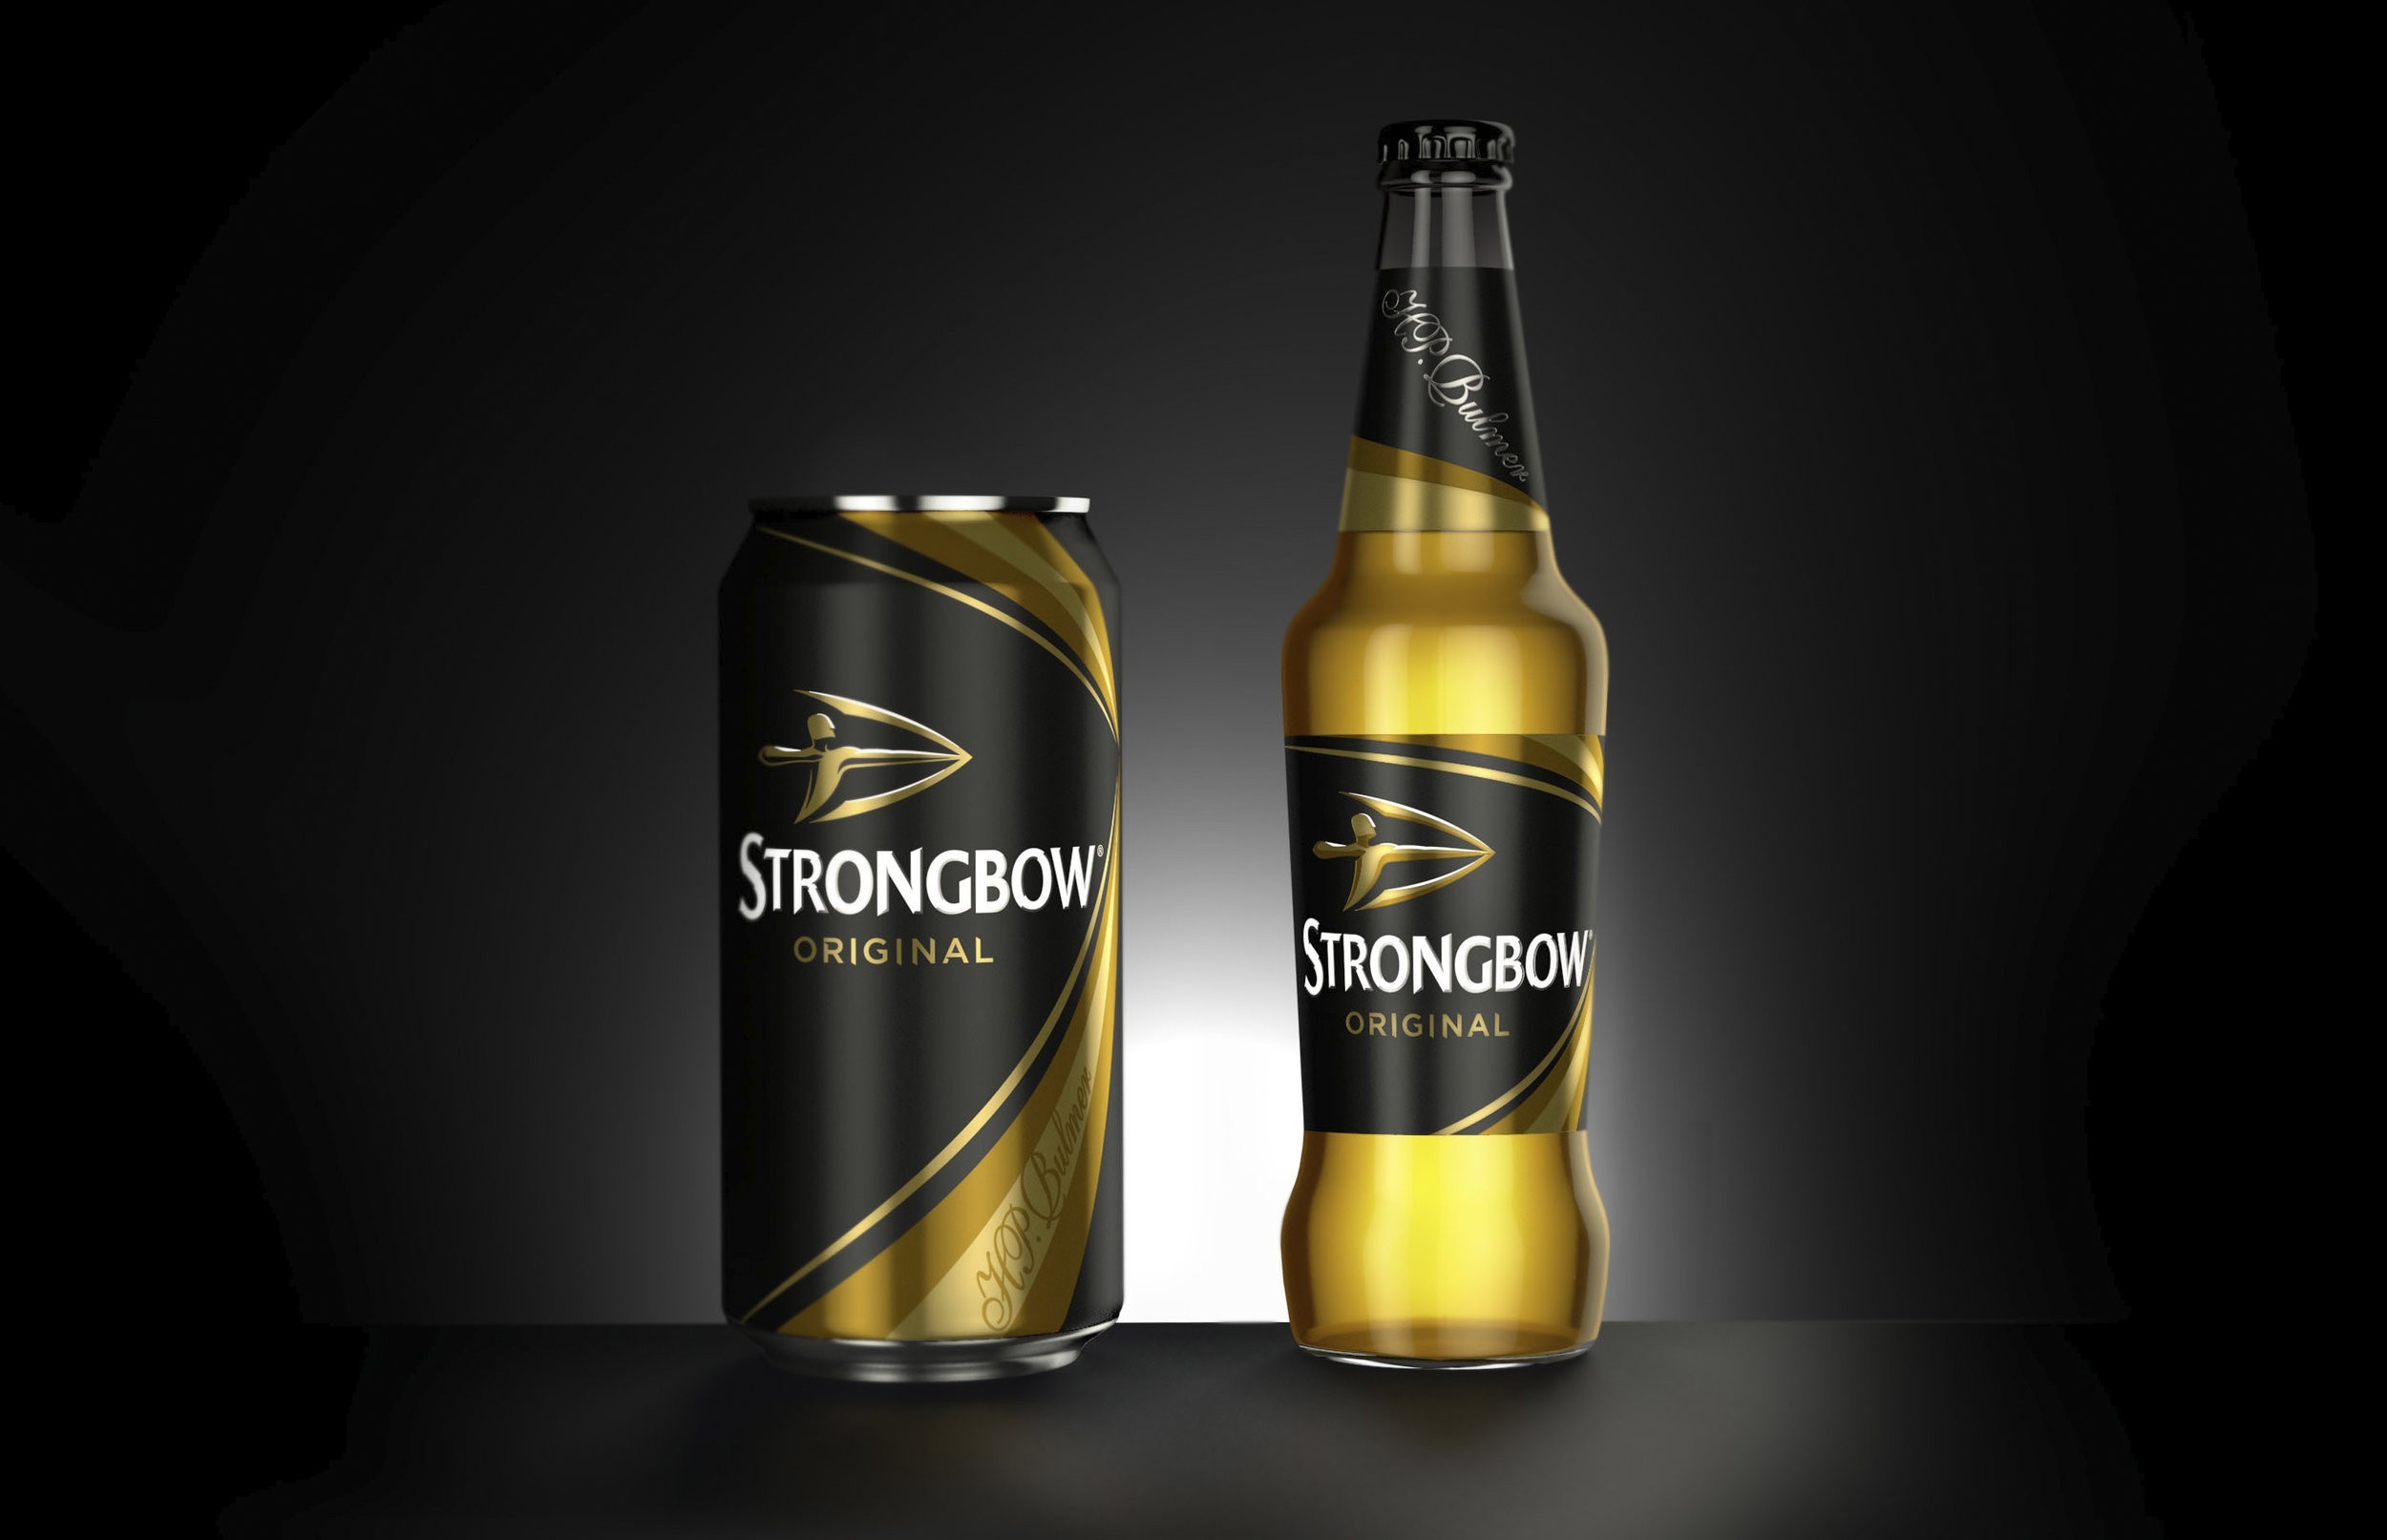 News: Grown like Craft Beer on Steroids say US Strongbow’s Brand Manager